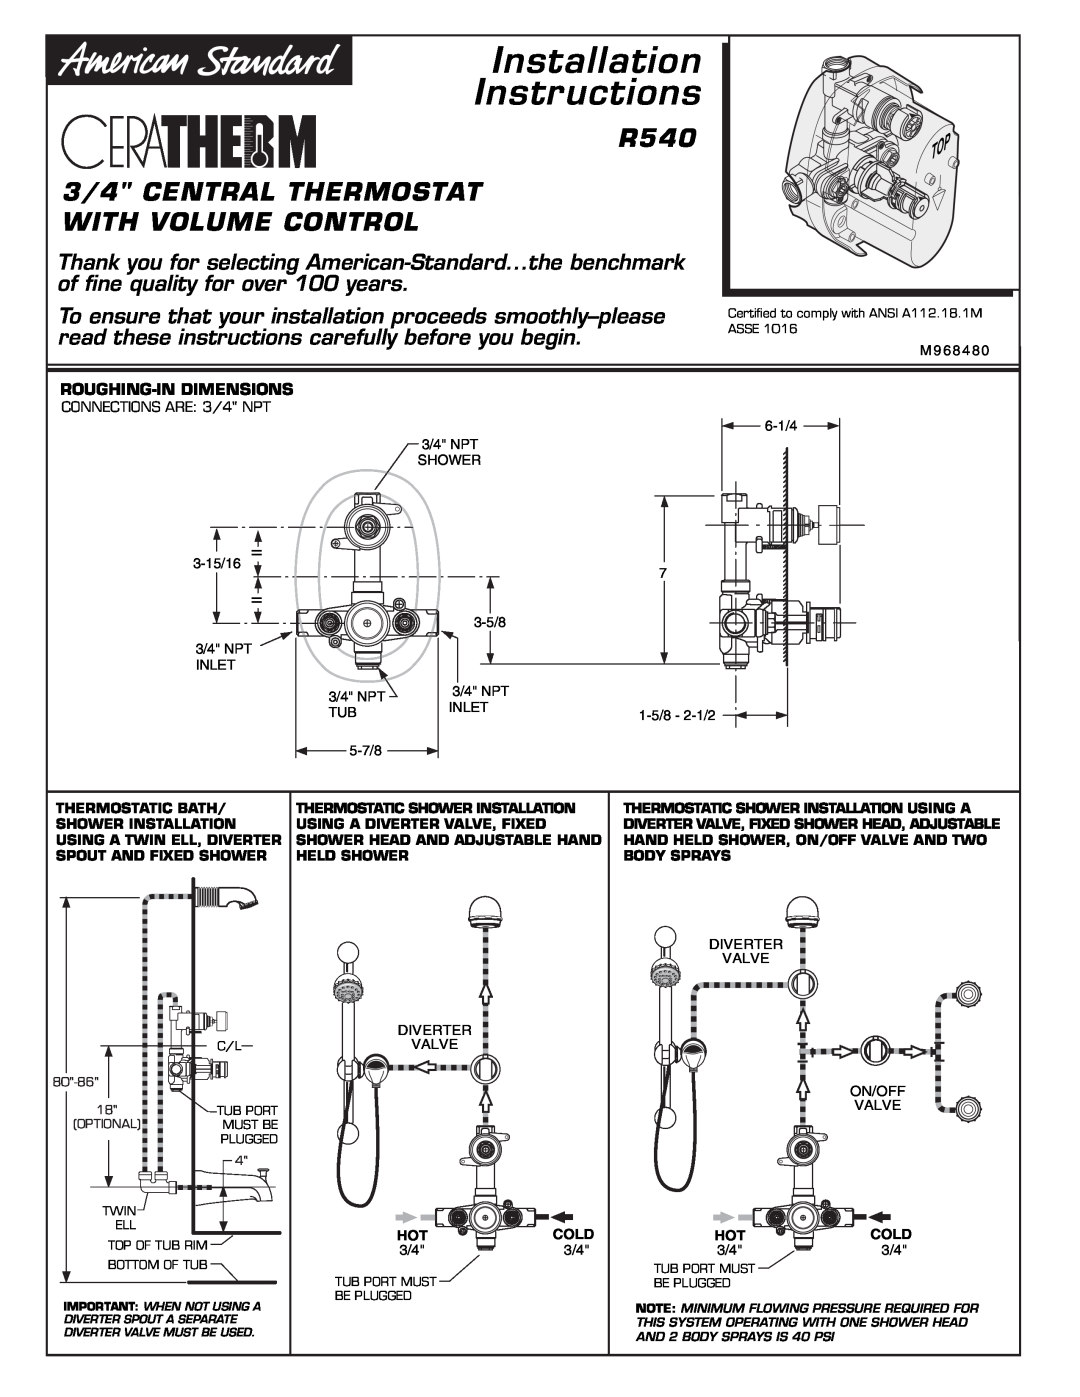 American Standard T050.210 R540 3/4 CENTRAL THERMOSTAT WITH VOLUME CONTROL, Installation Instructions 